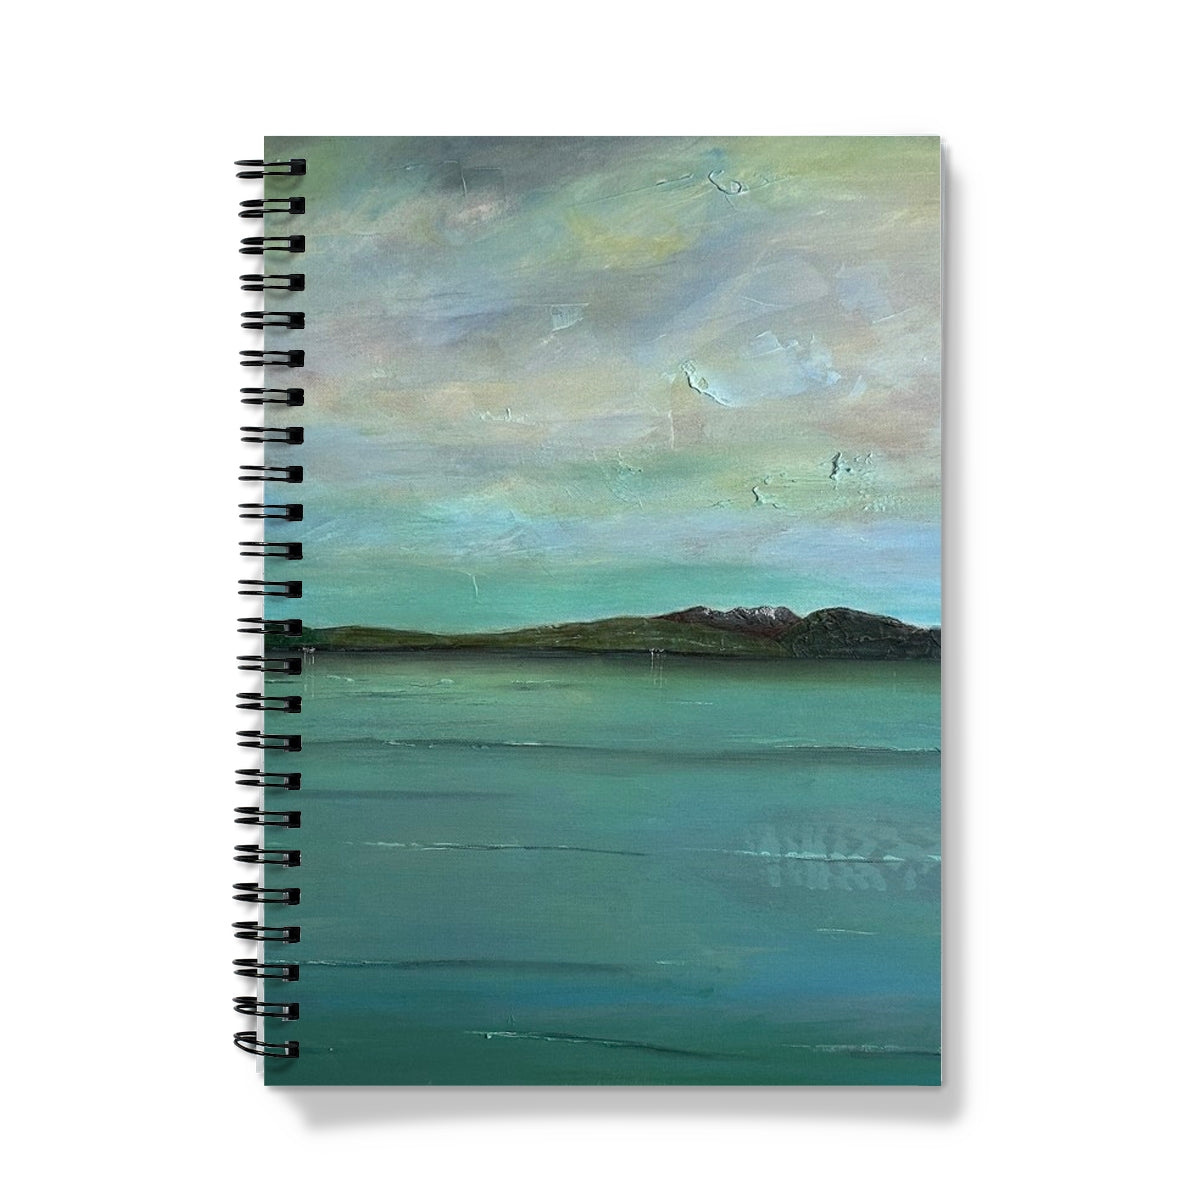 An Ethereal Loch Lomond Art Gifts Notebook-Journals & Notebooks-Scottish Lochs & Mountains Art Gallery-A5-Graph-Paintings, Prints, Homeware, Art Gifts From Scotland By Scottish Artist Kevin Hunter